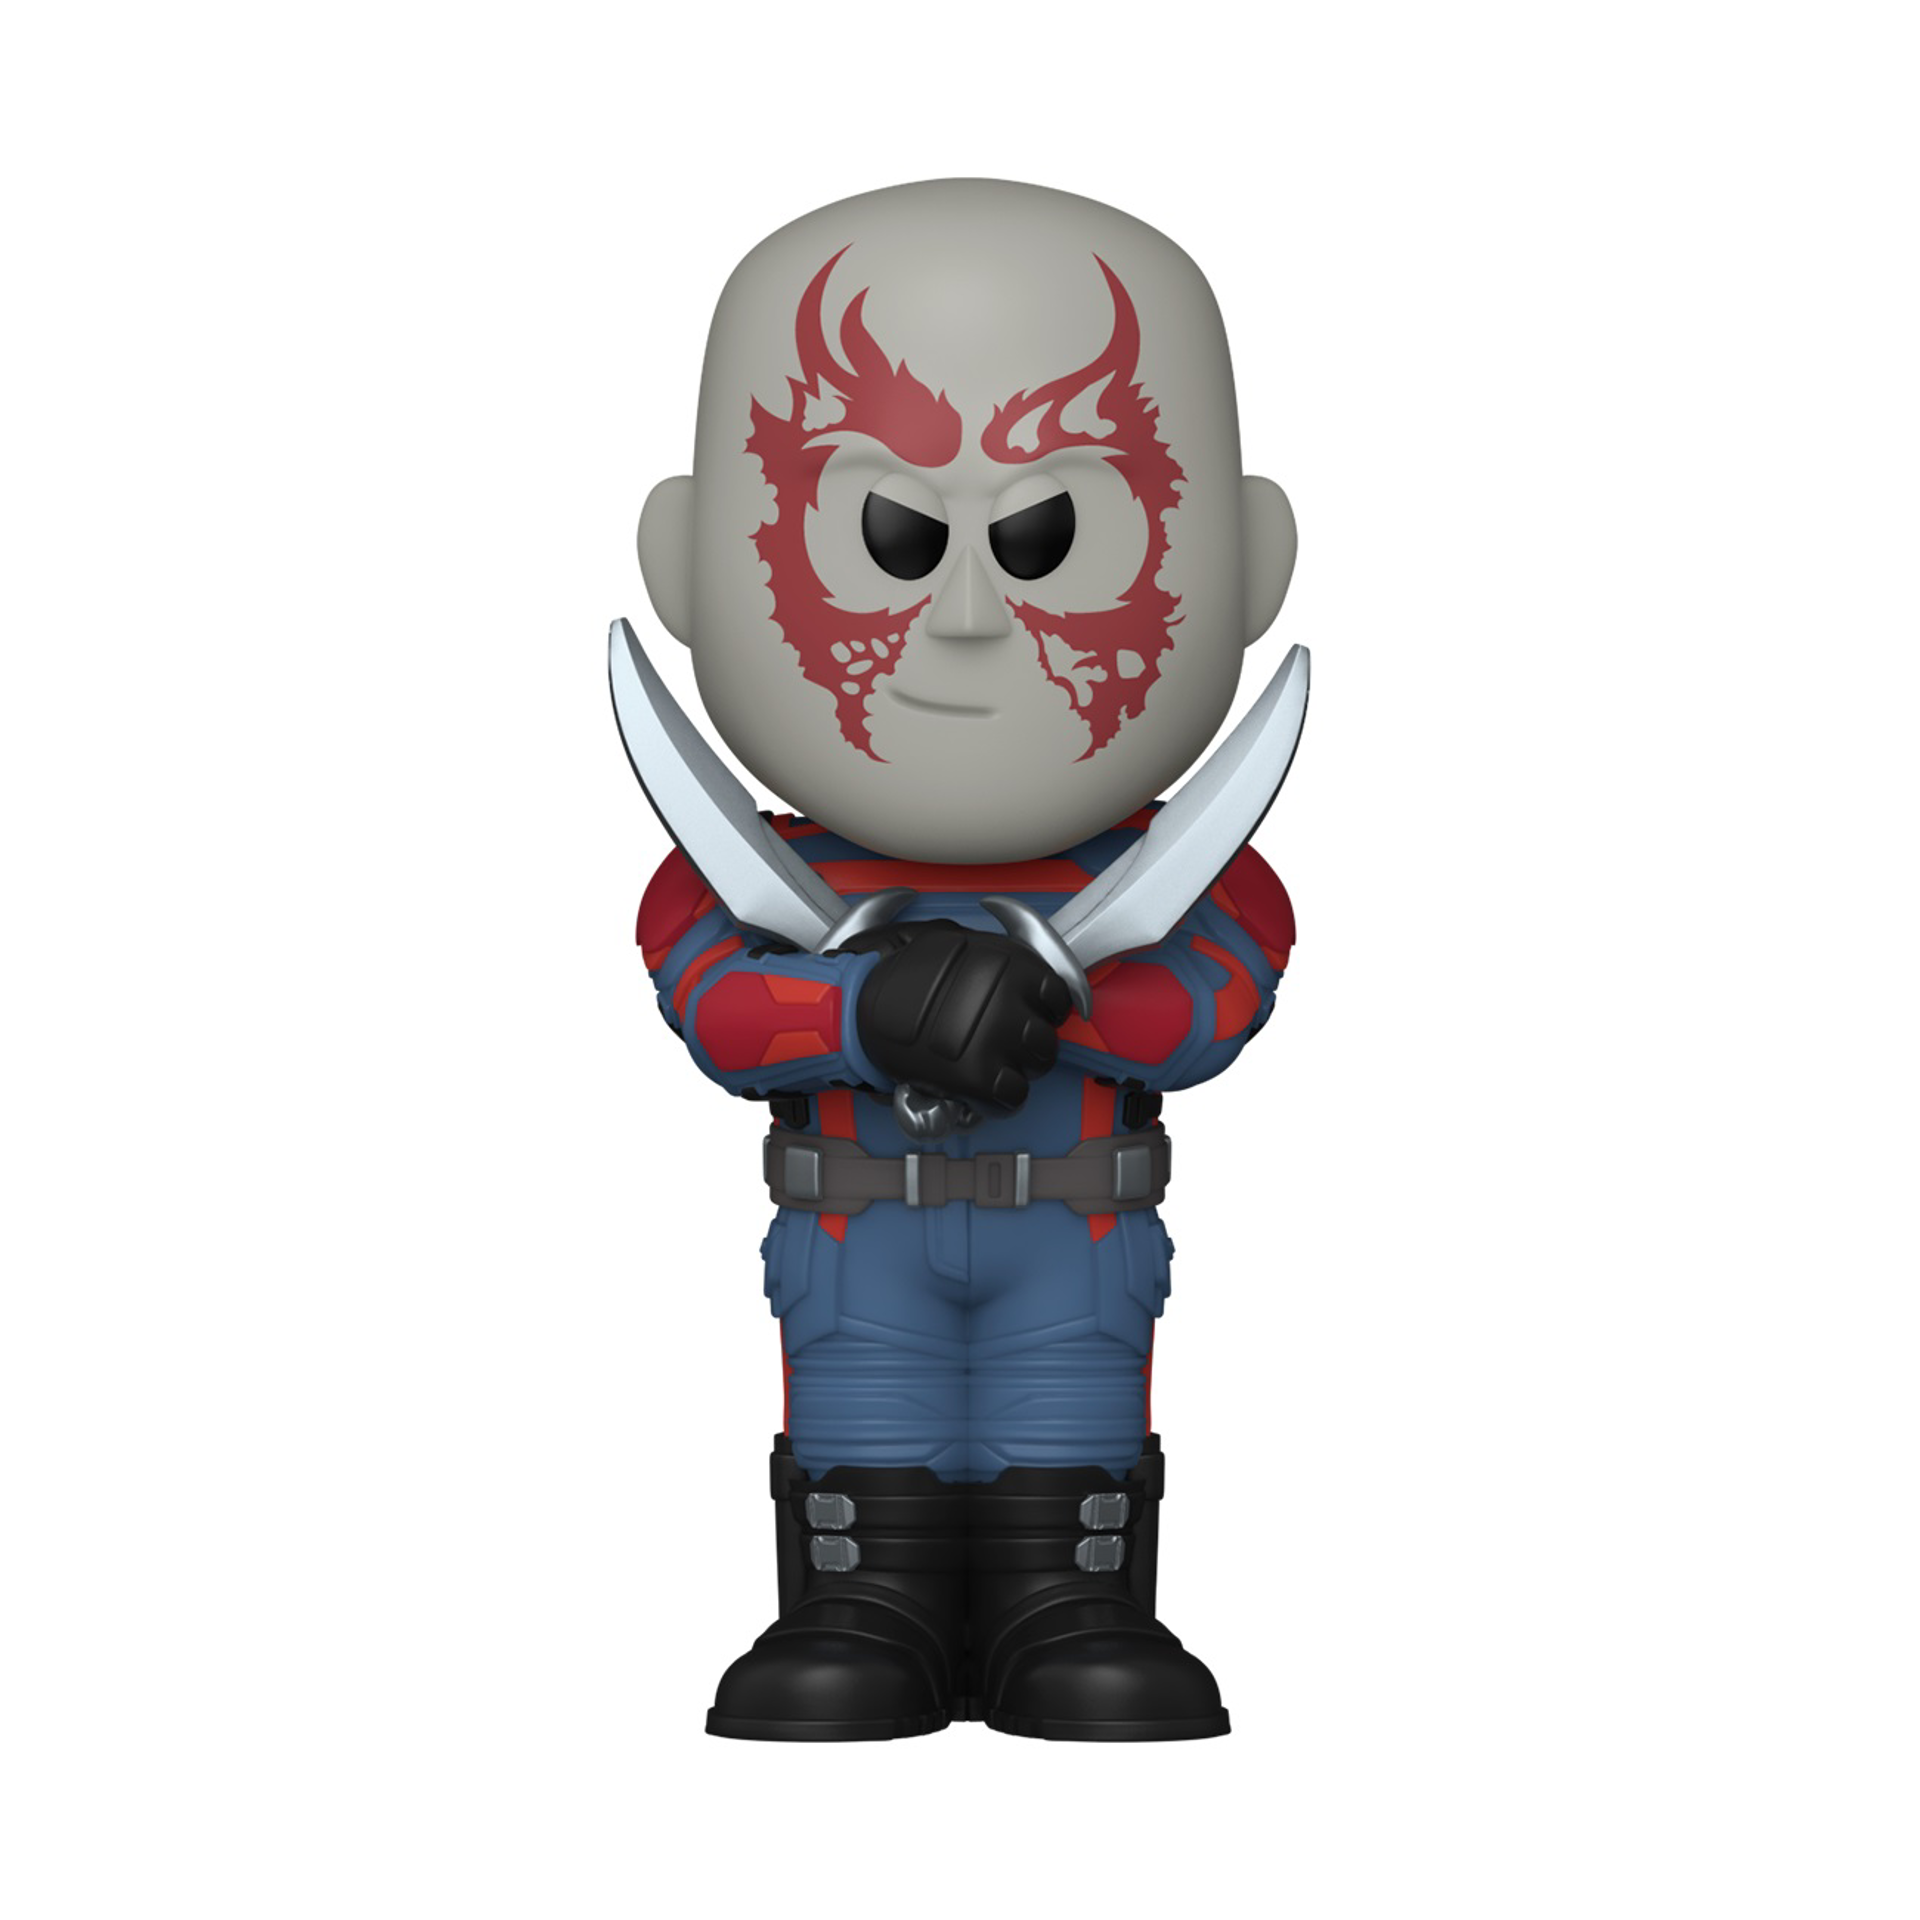 Funko Vinyl Soda: Guardians of the Galaxy 3 - Drax (chance of special Chase edition)